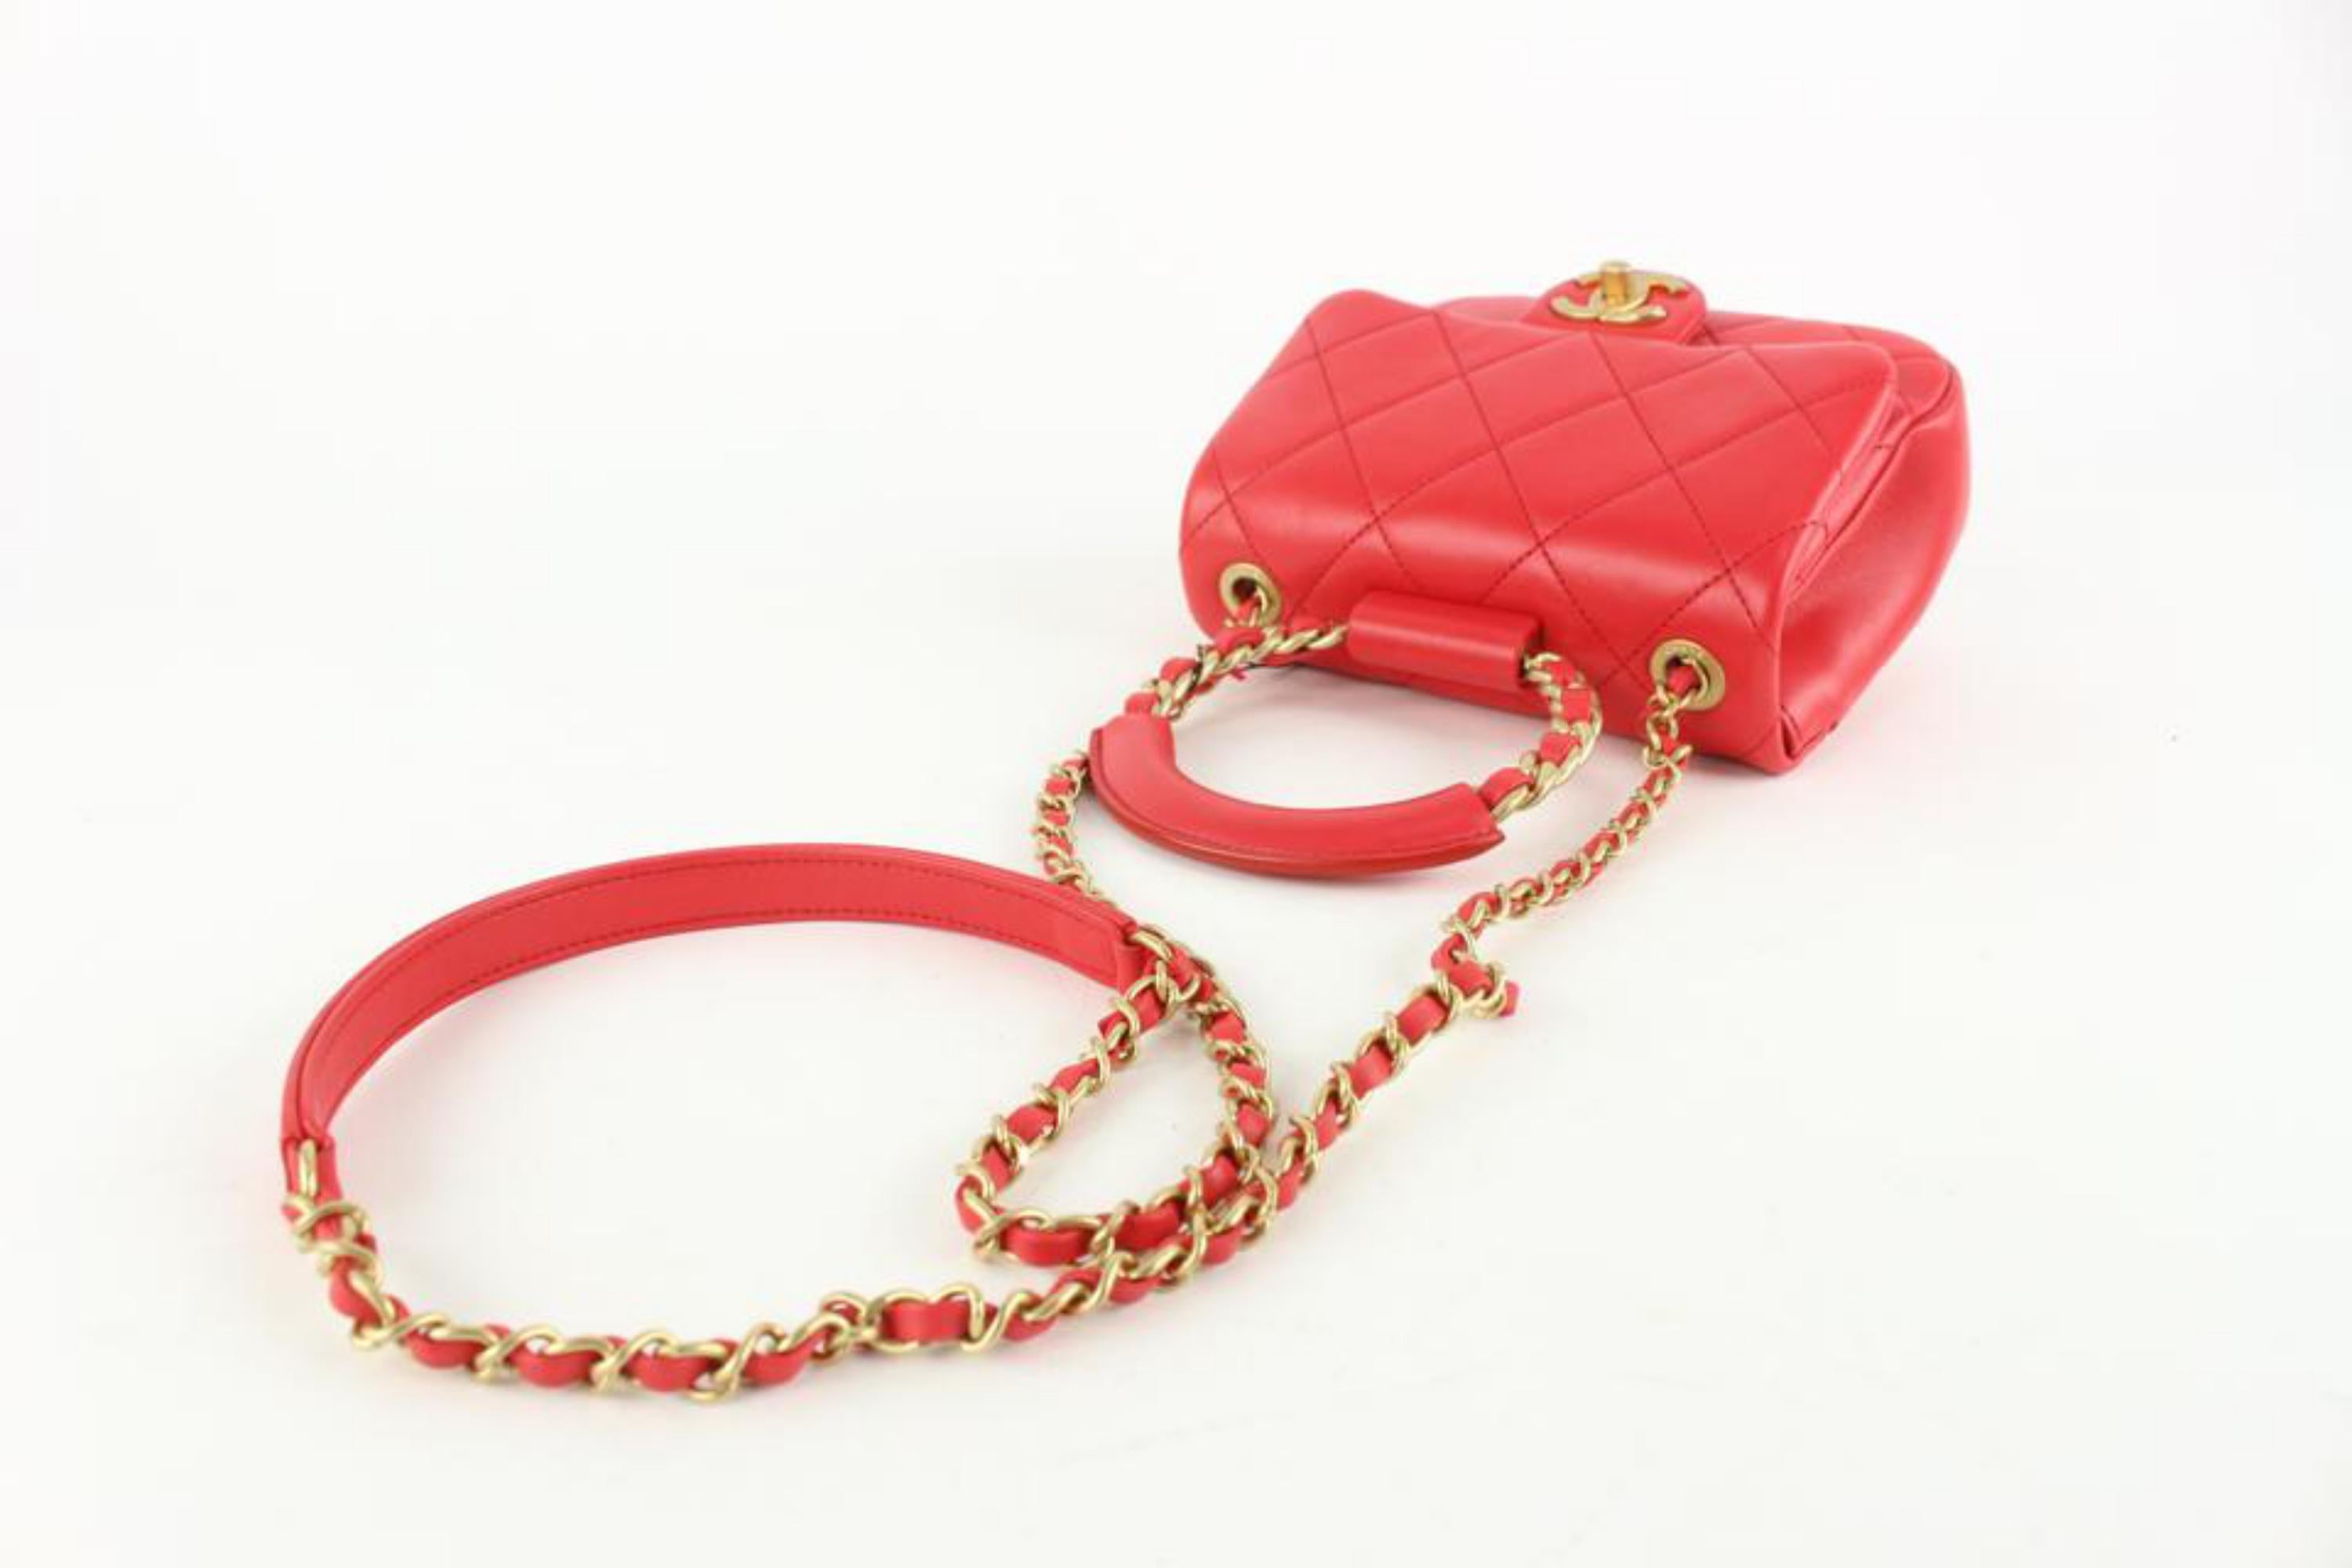 Chanel NEW Quilted Red Chain Bracelet Small Flap Top Handle Crossbody 114c48 3